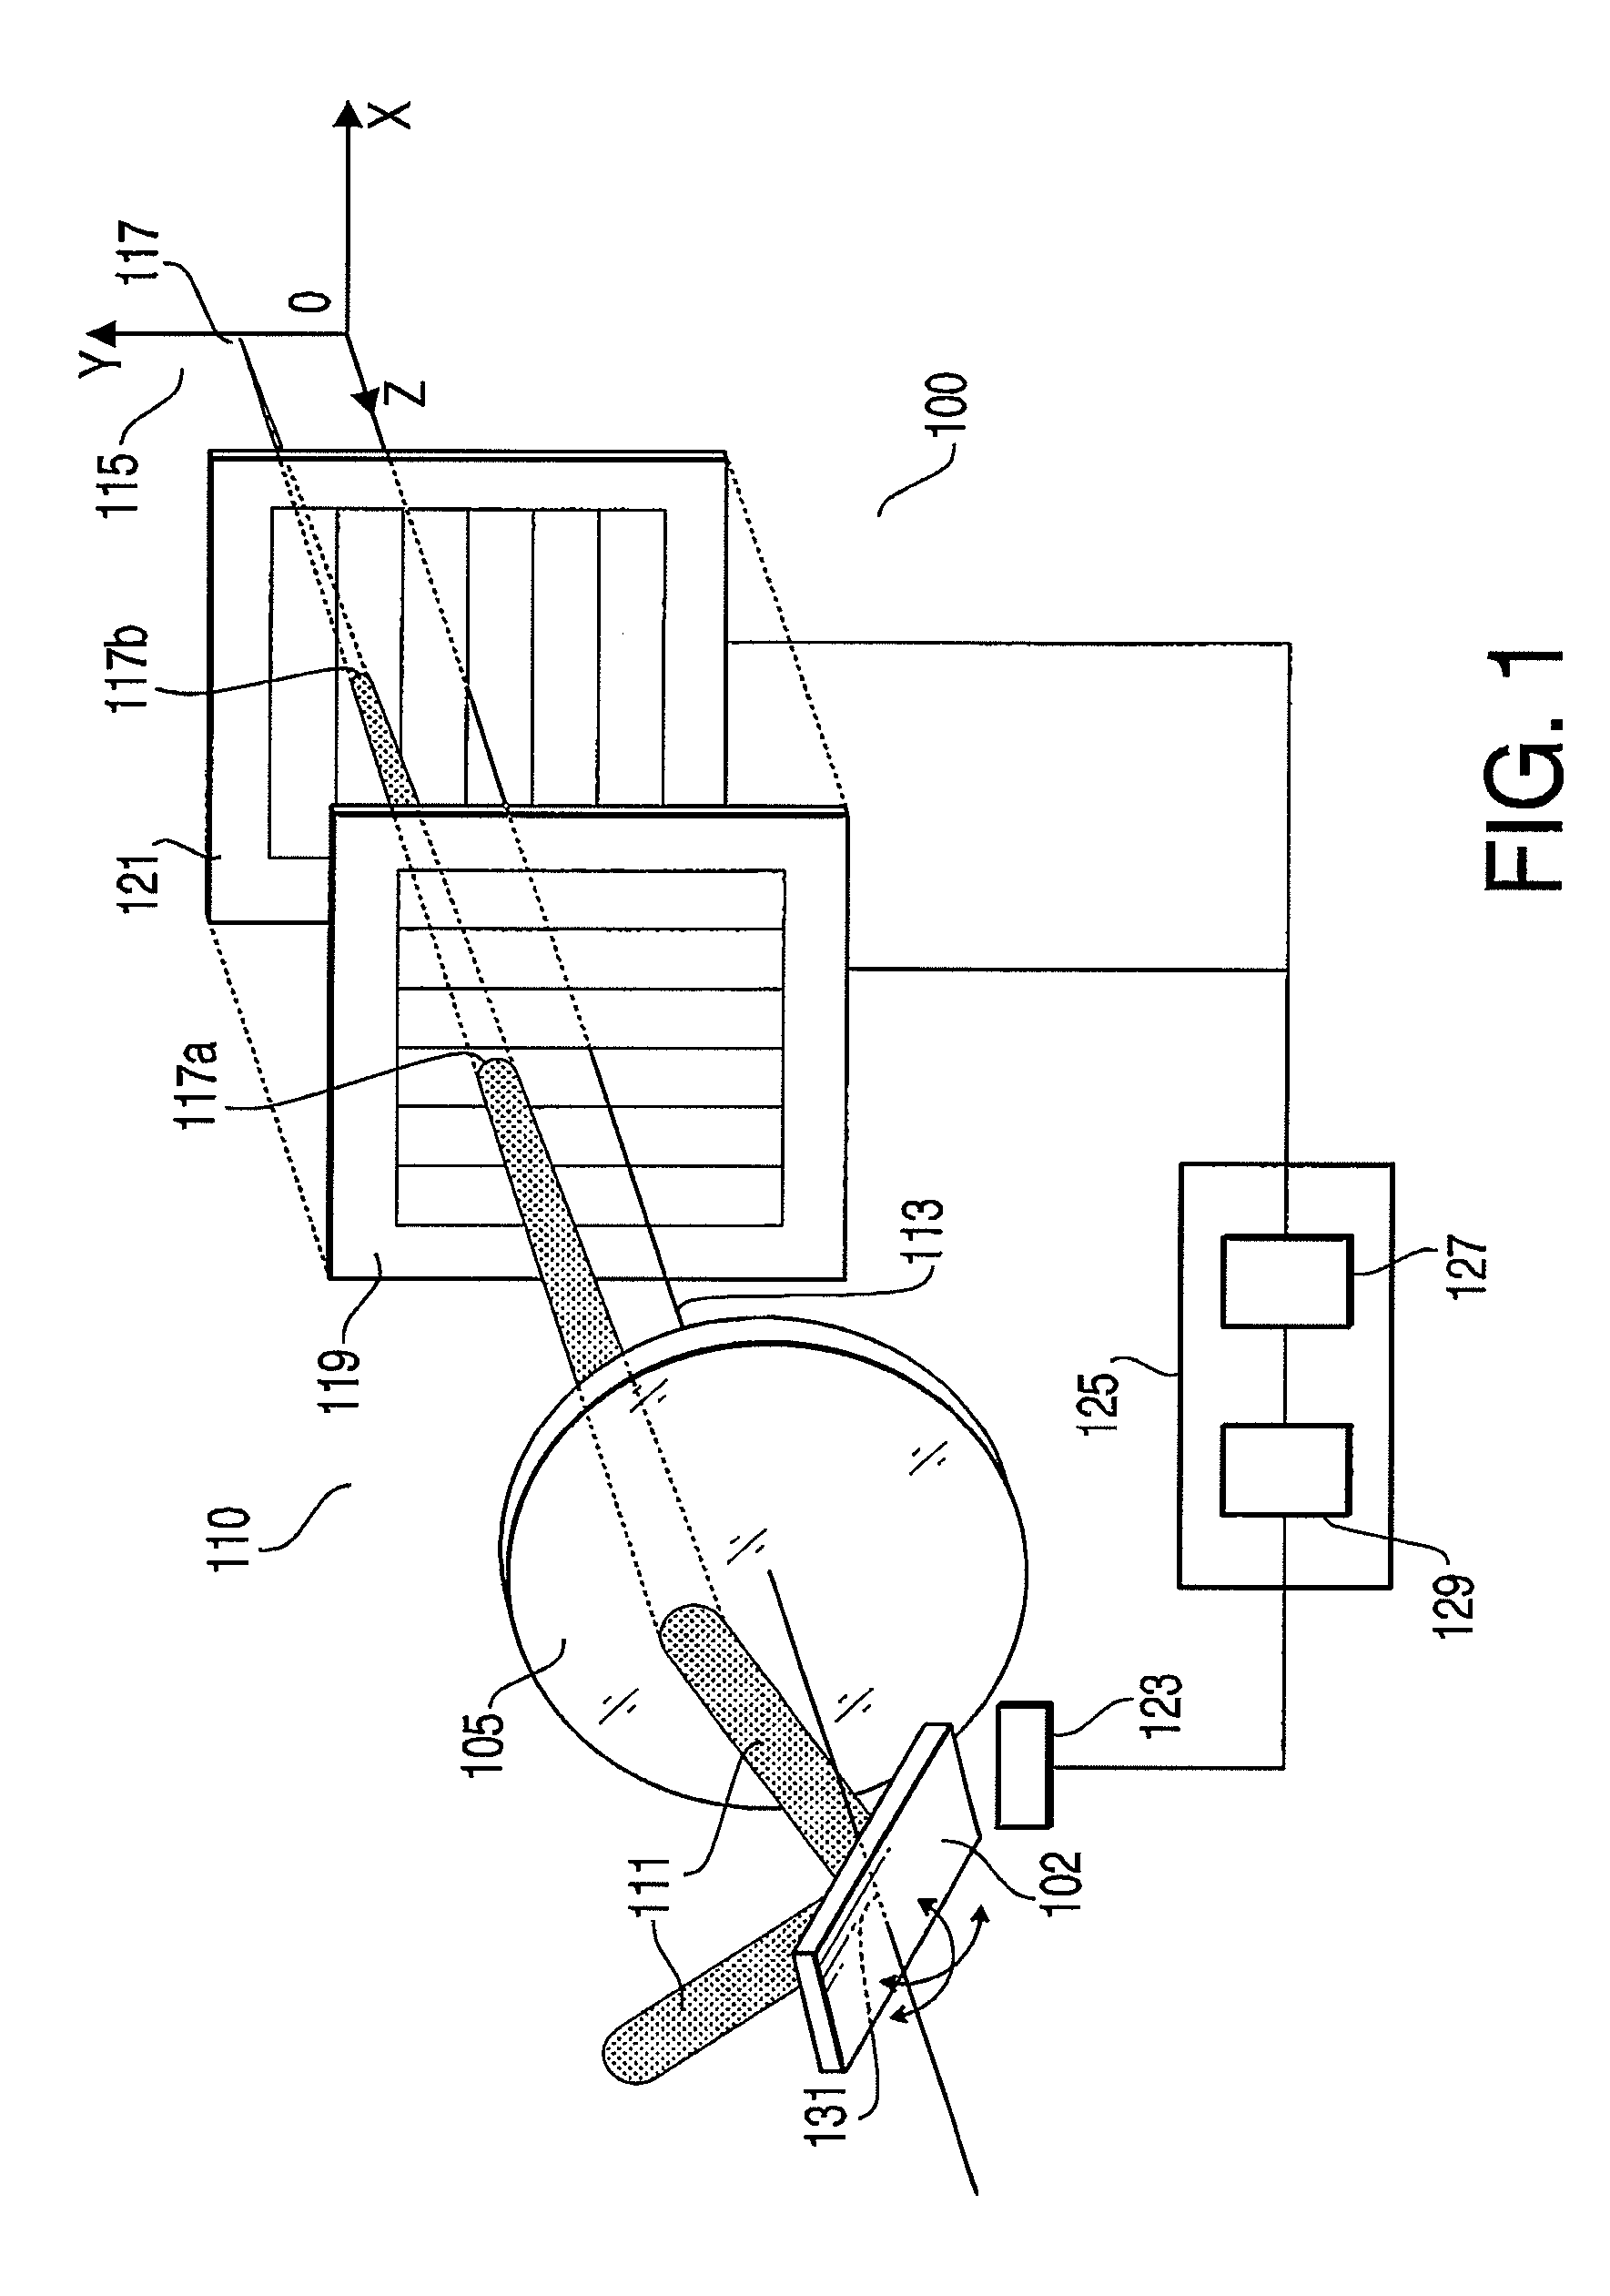 Optical scanner device